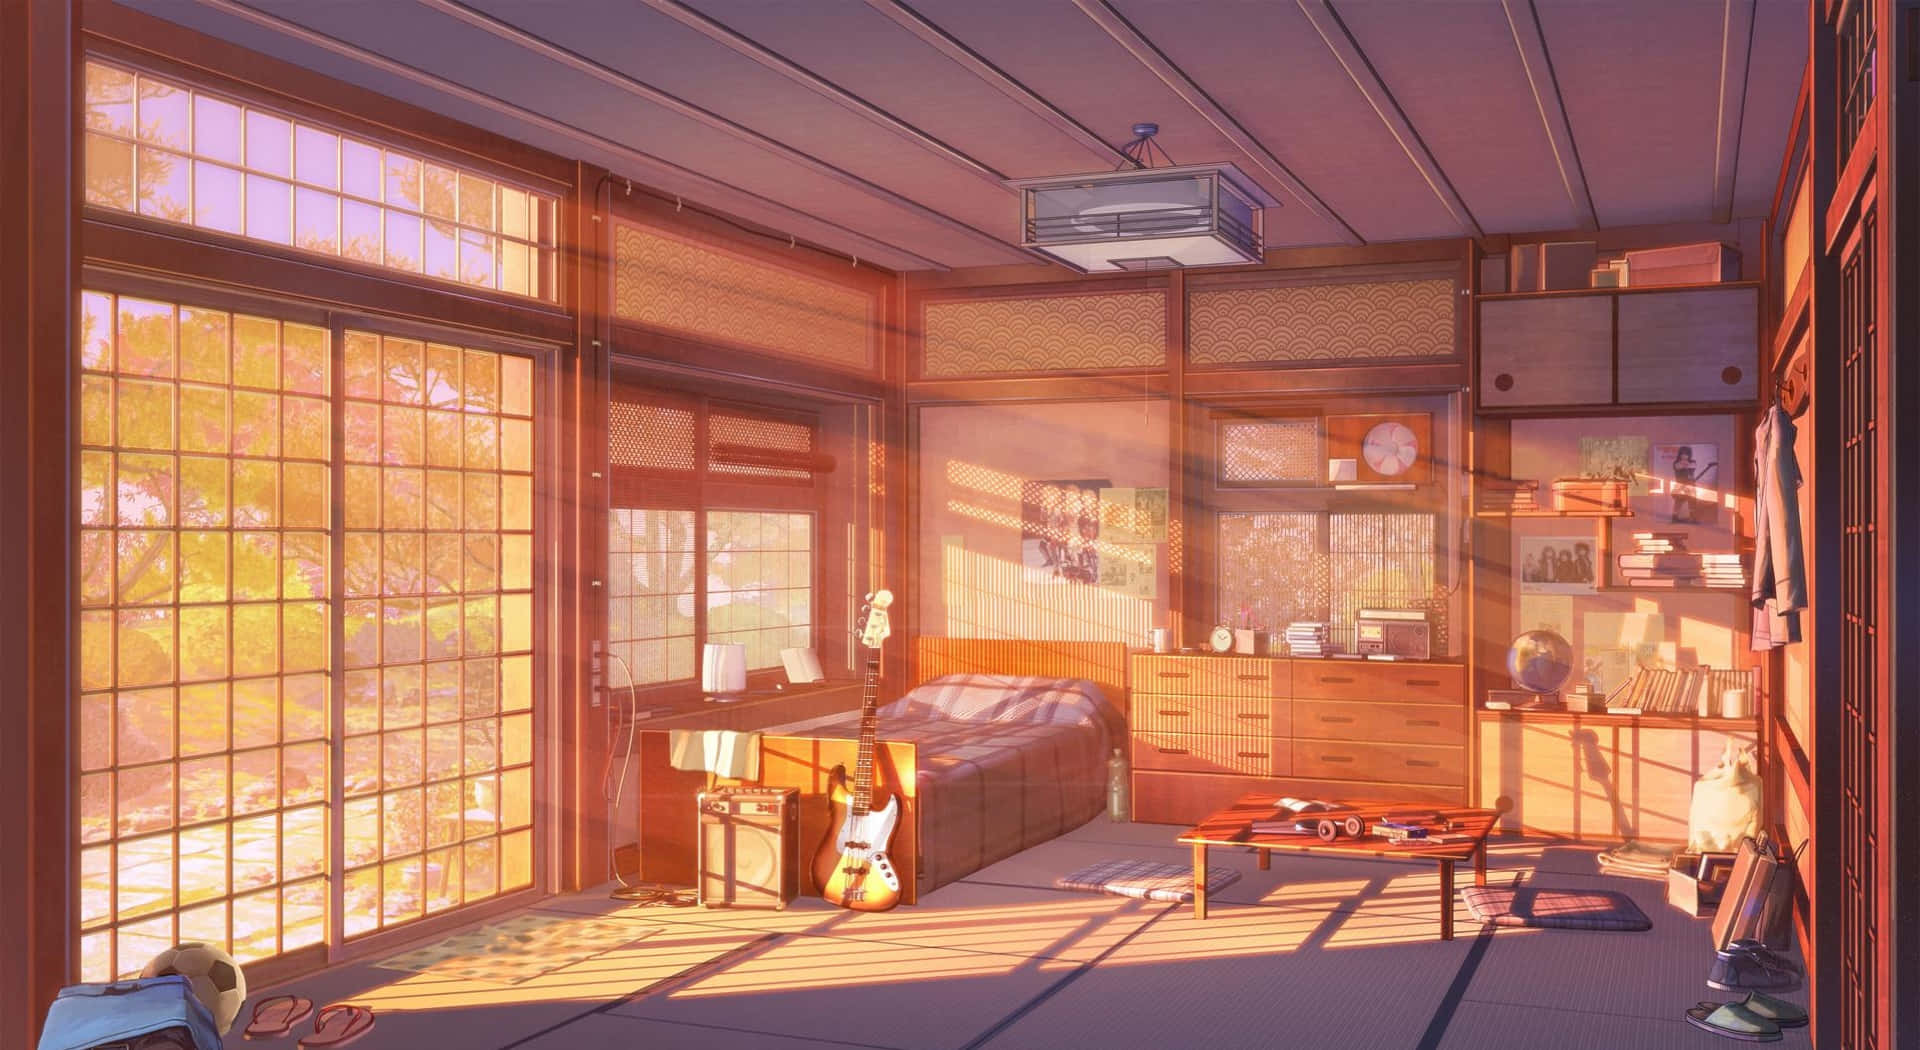 "A peaceful space to relax, watch Anime, and recharge!"